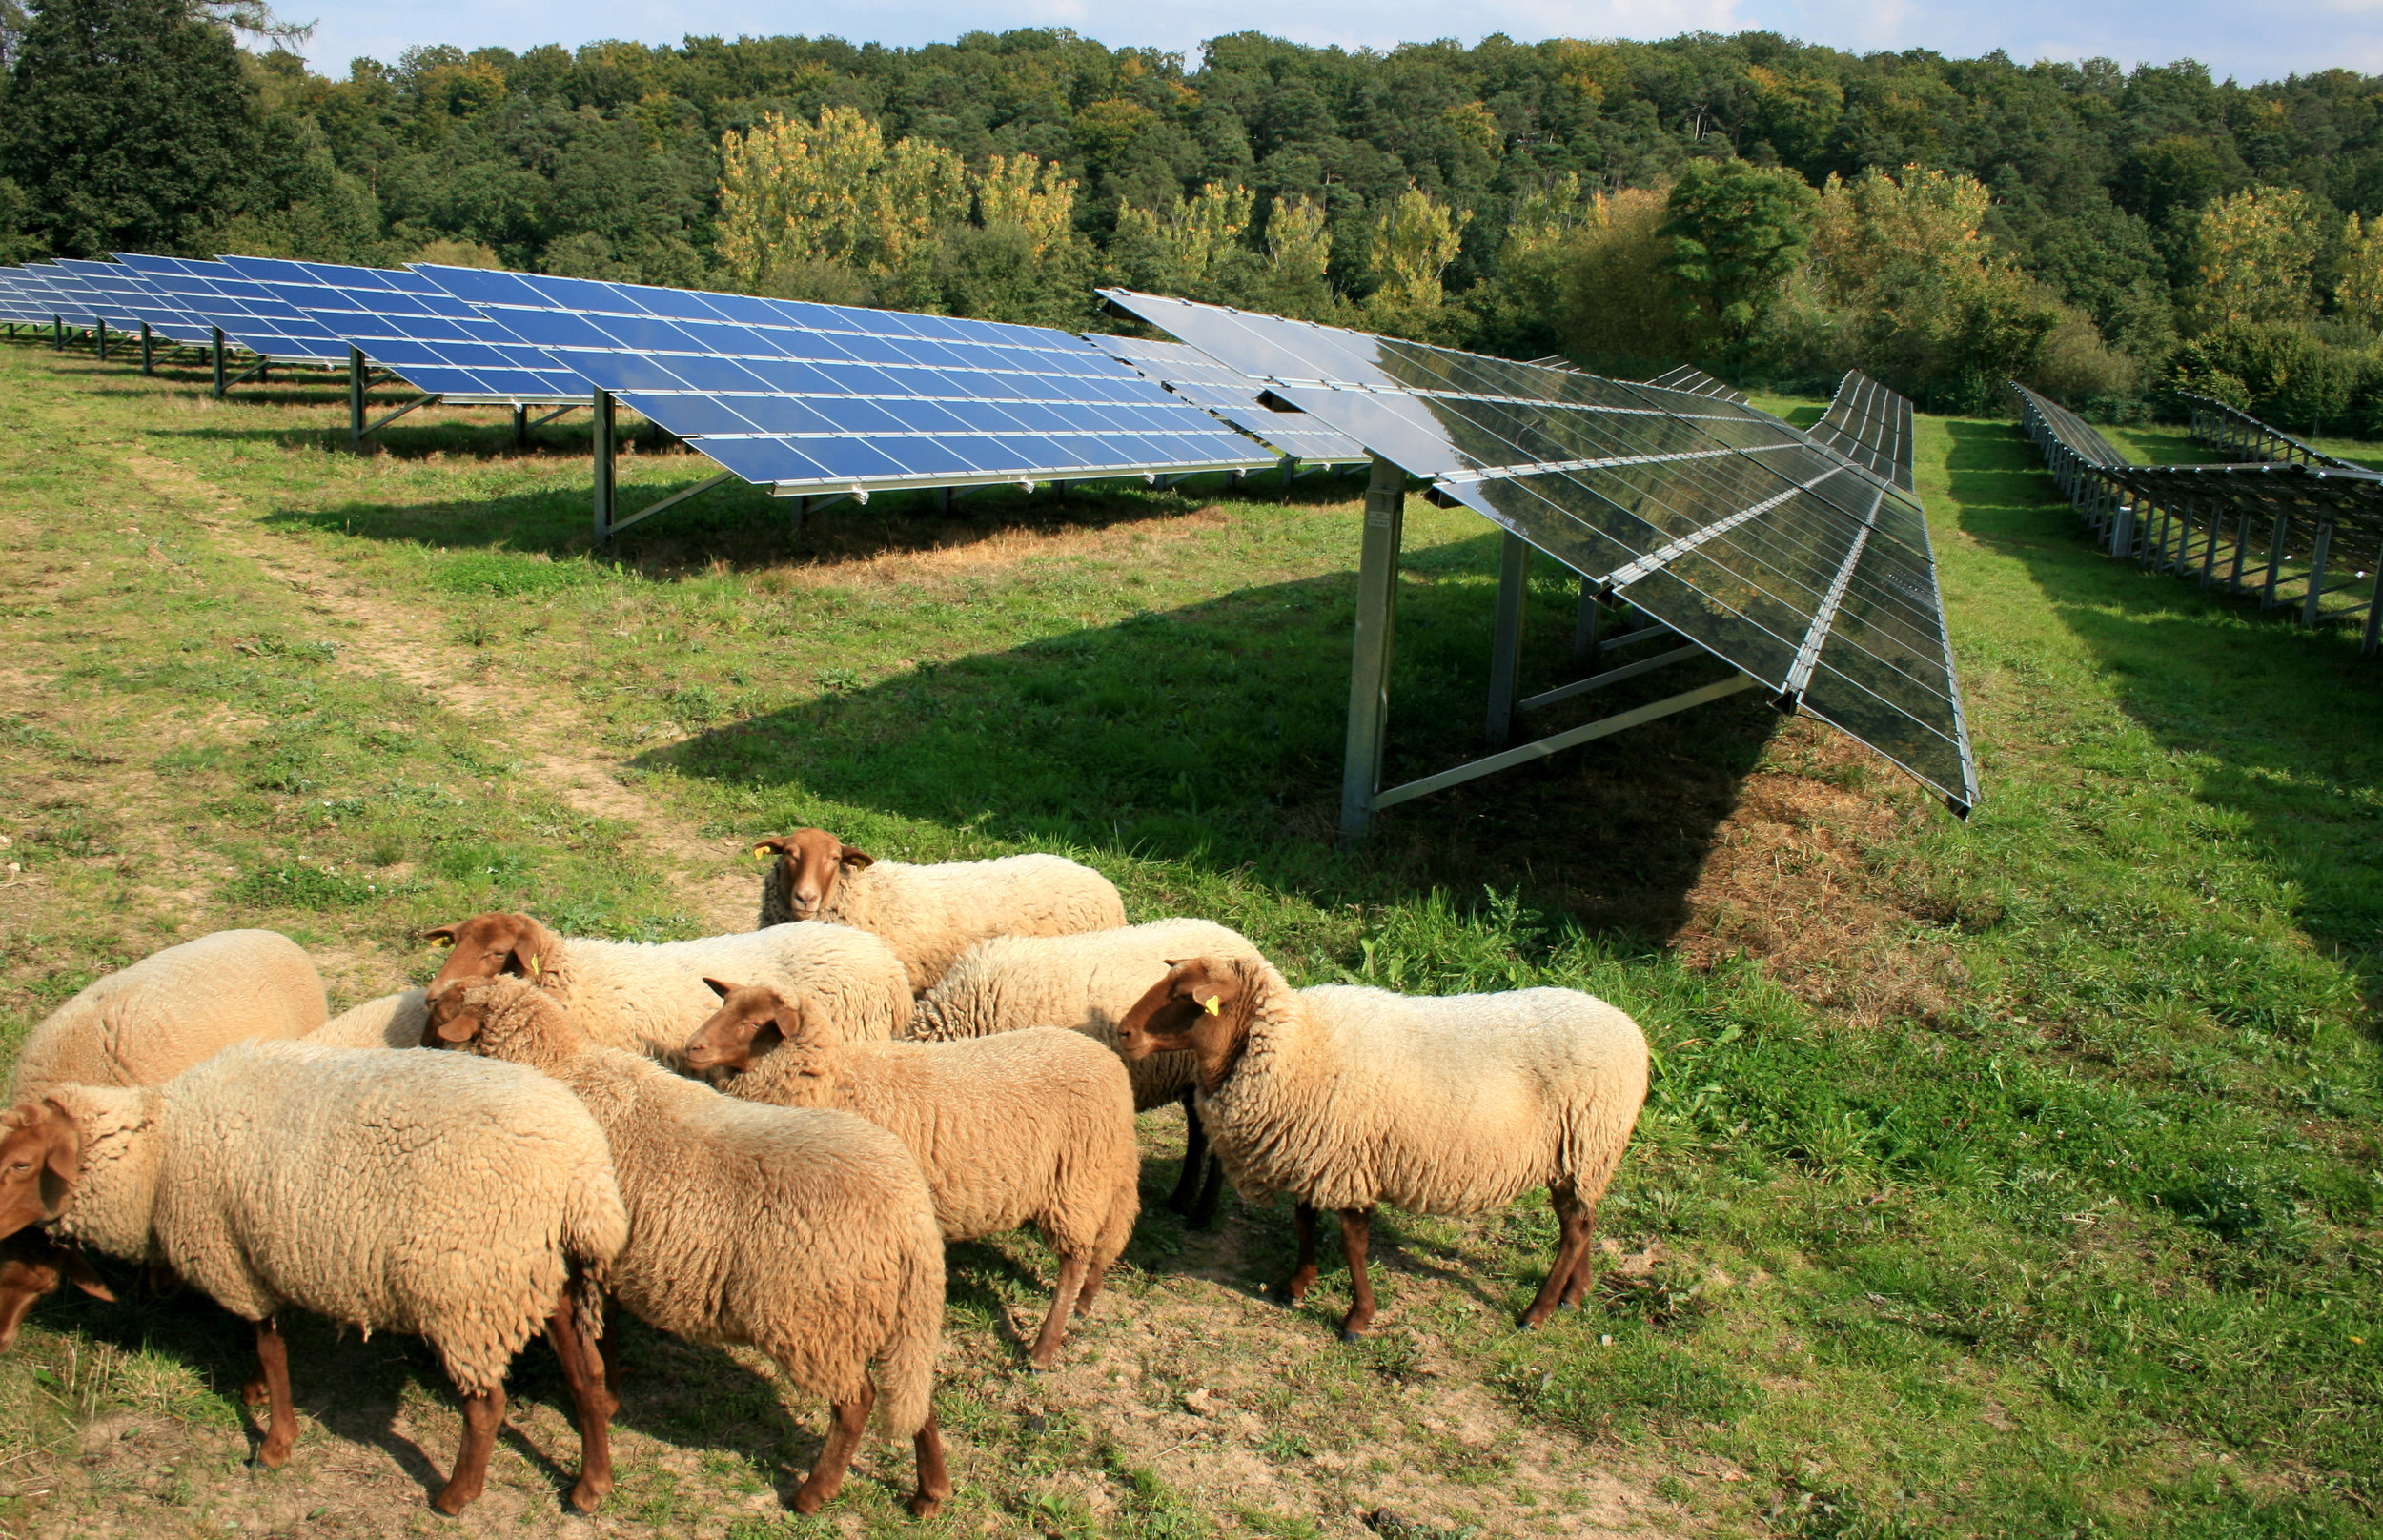  Sustainable Grounds Maintenance   For Solar Farms    Learn More  